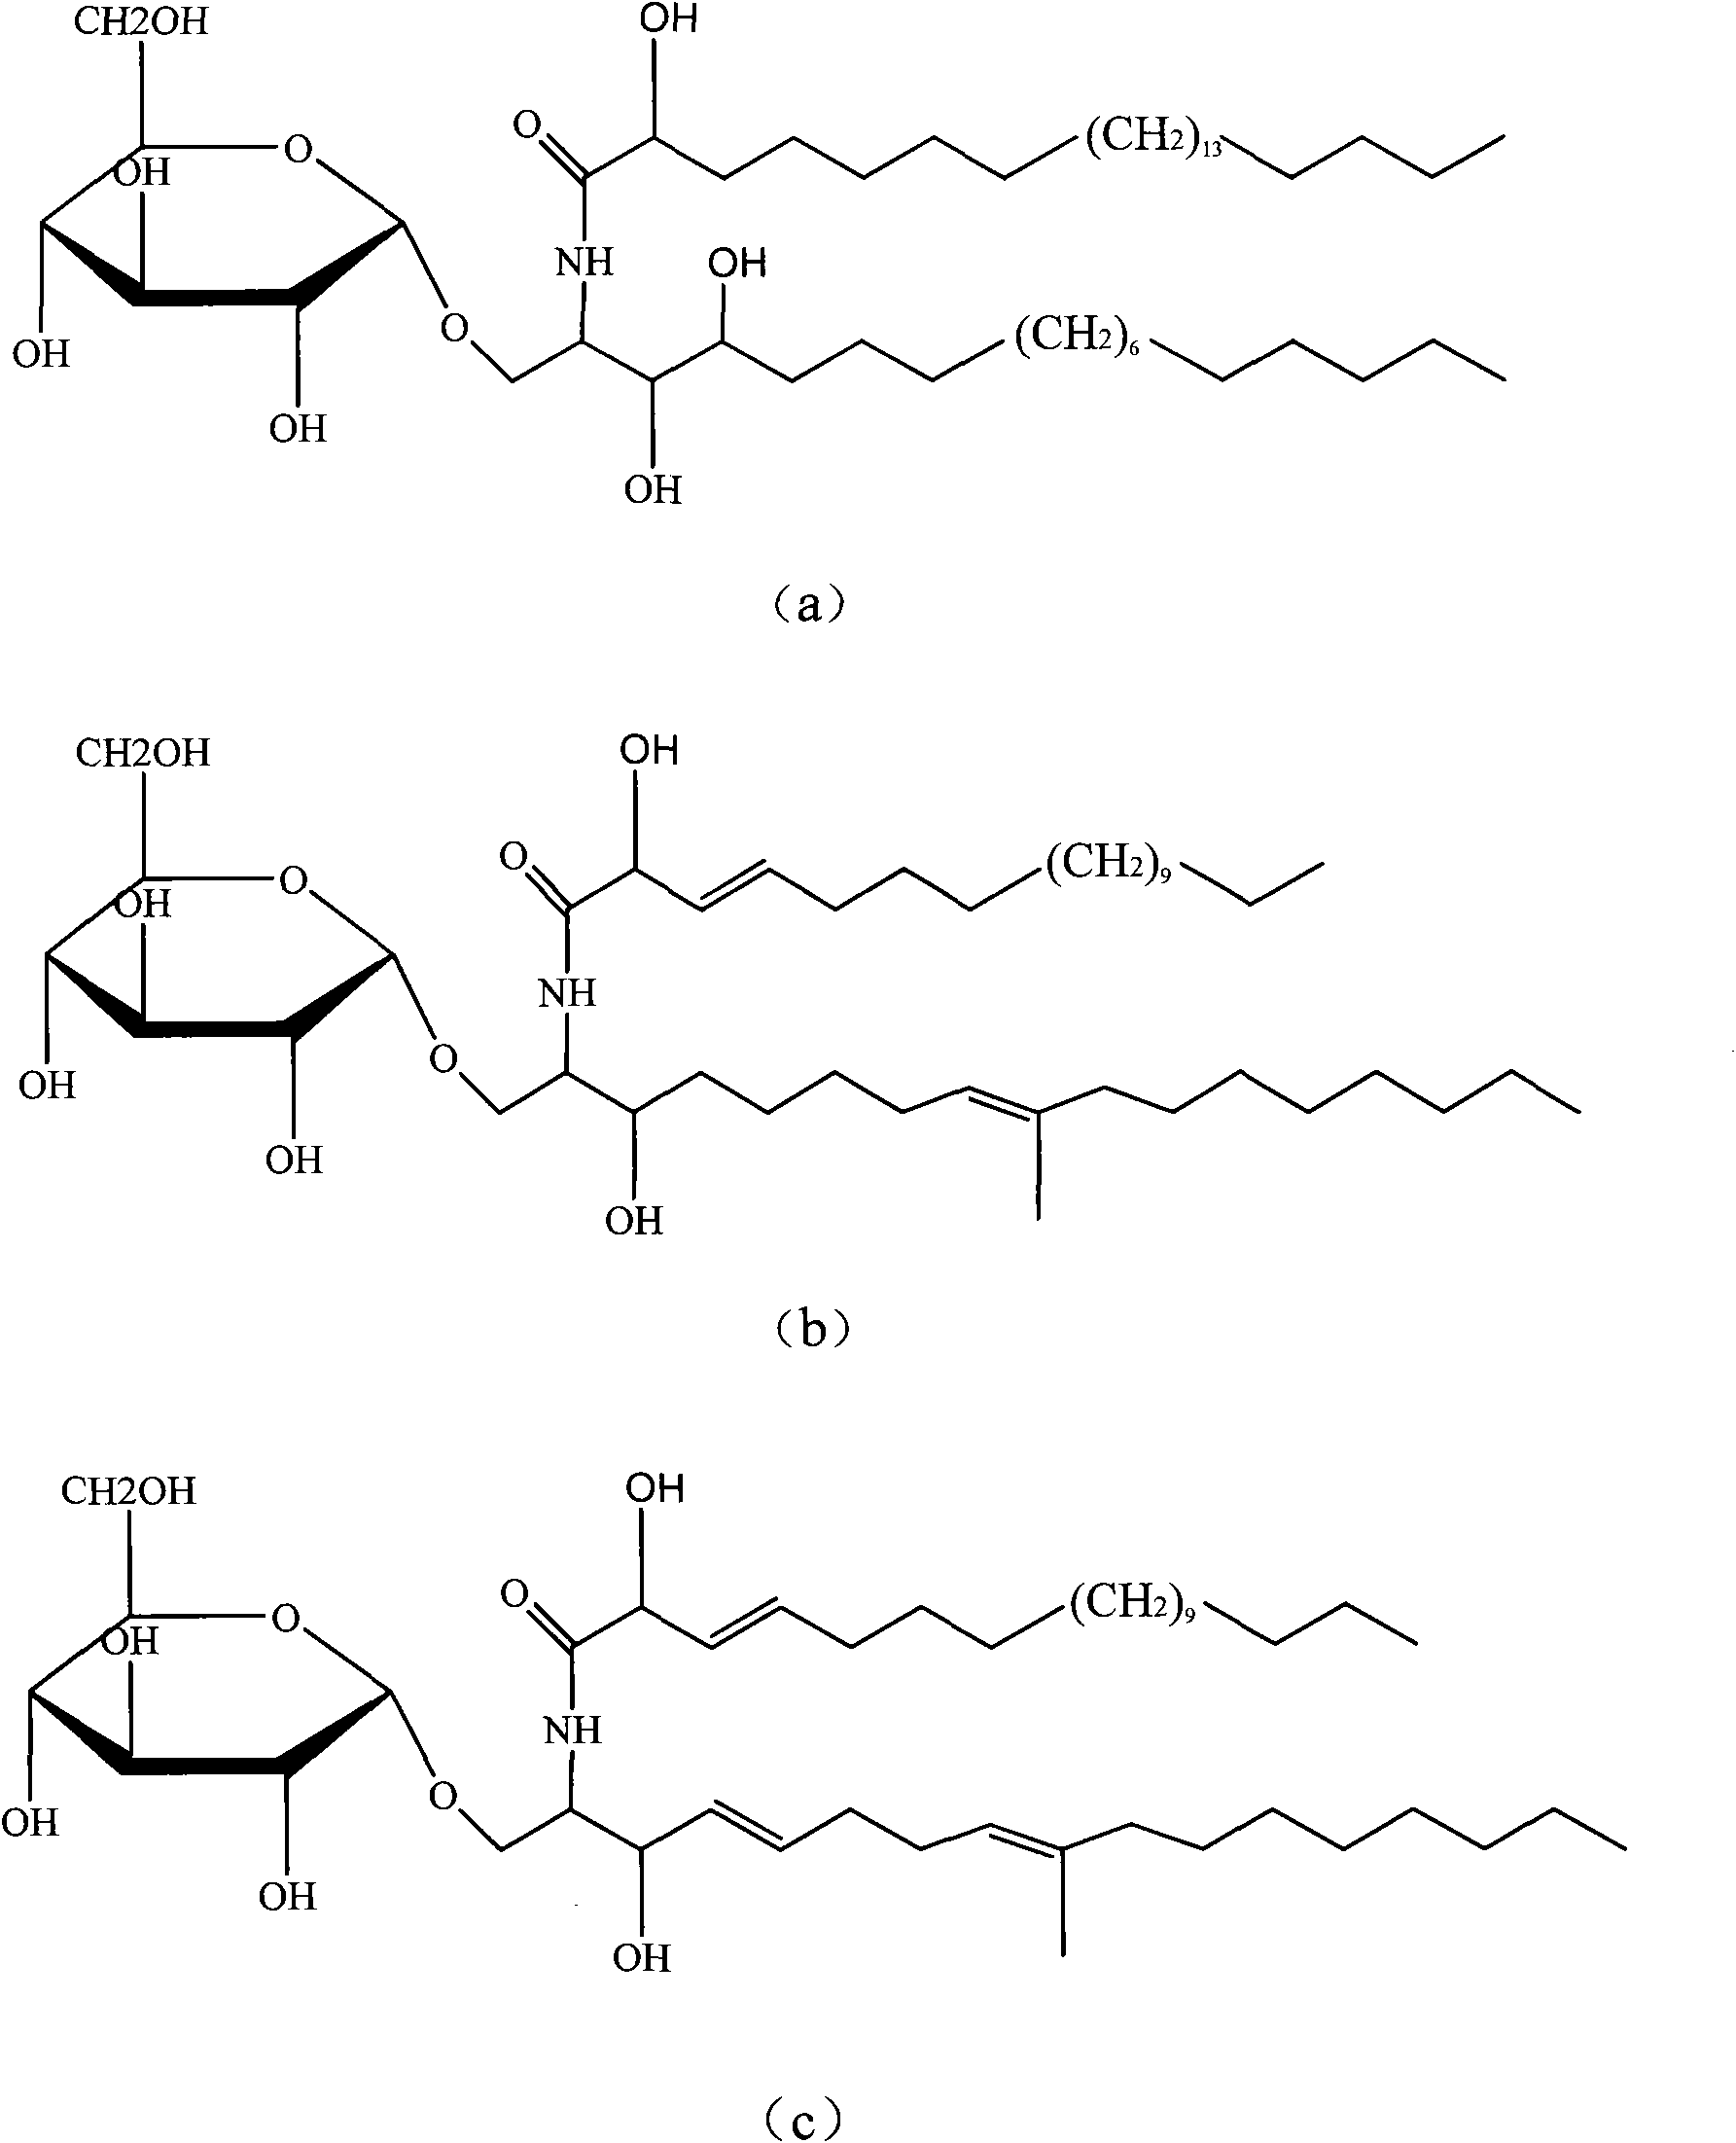 Preparation, purification and content detection methods for cerebroside